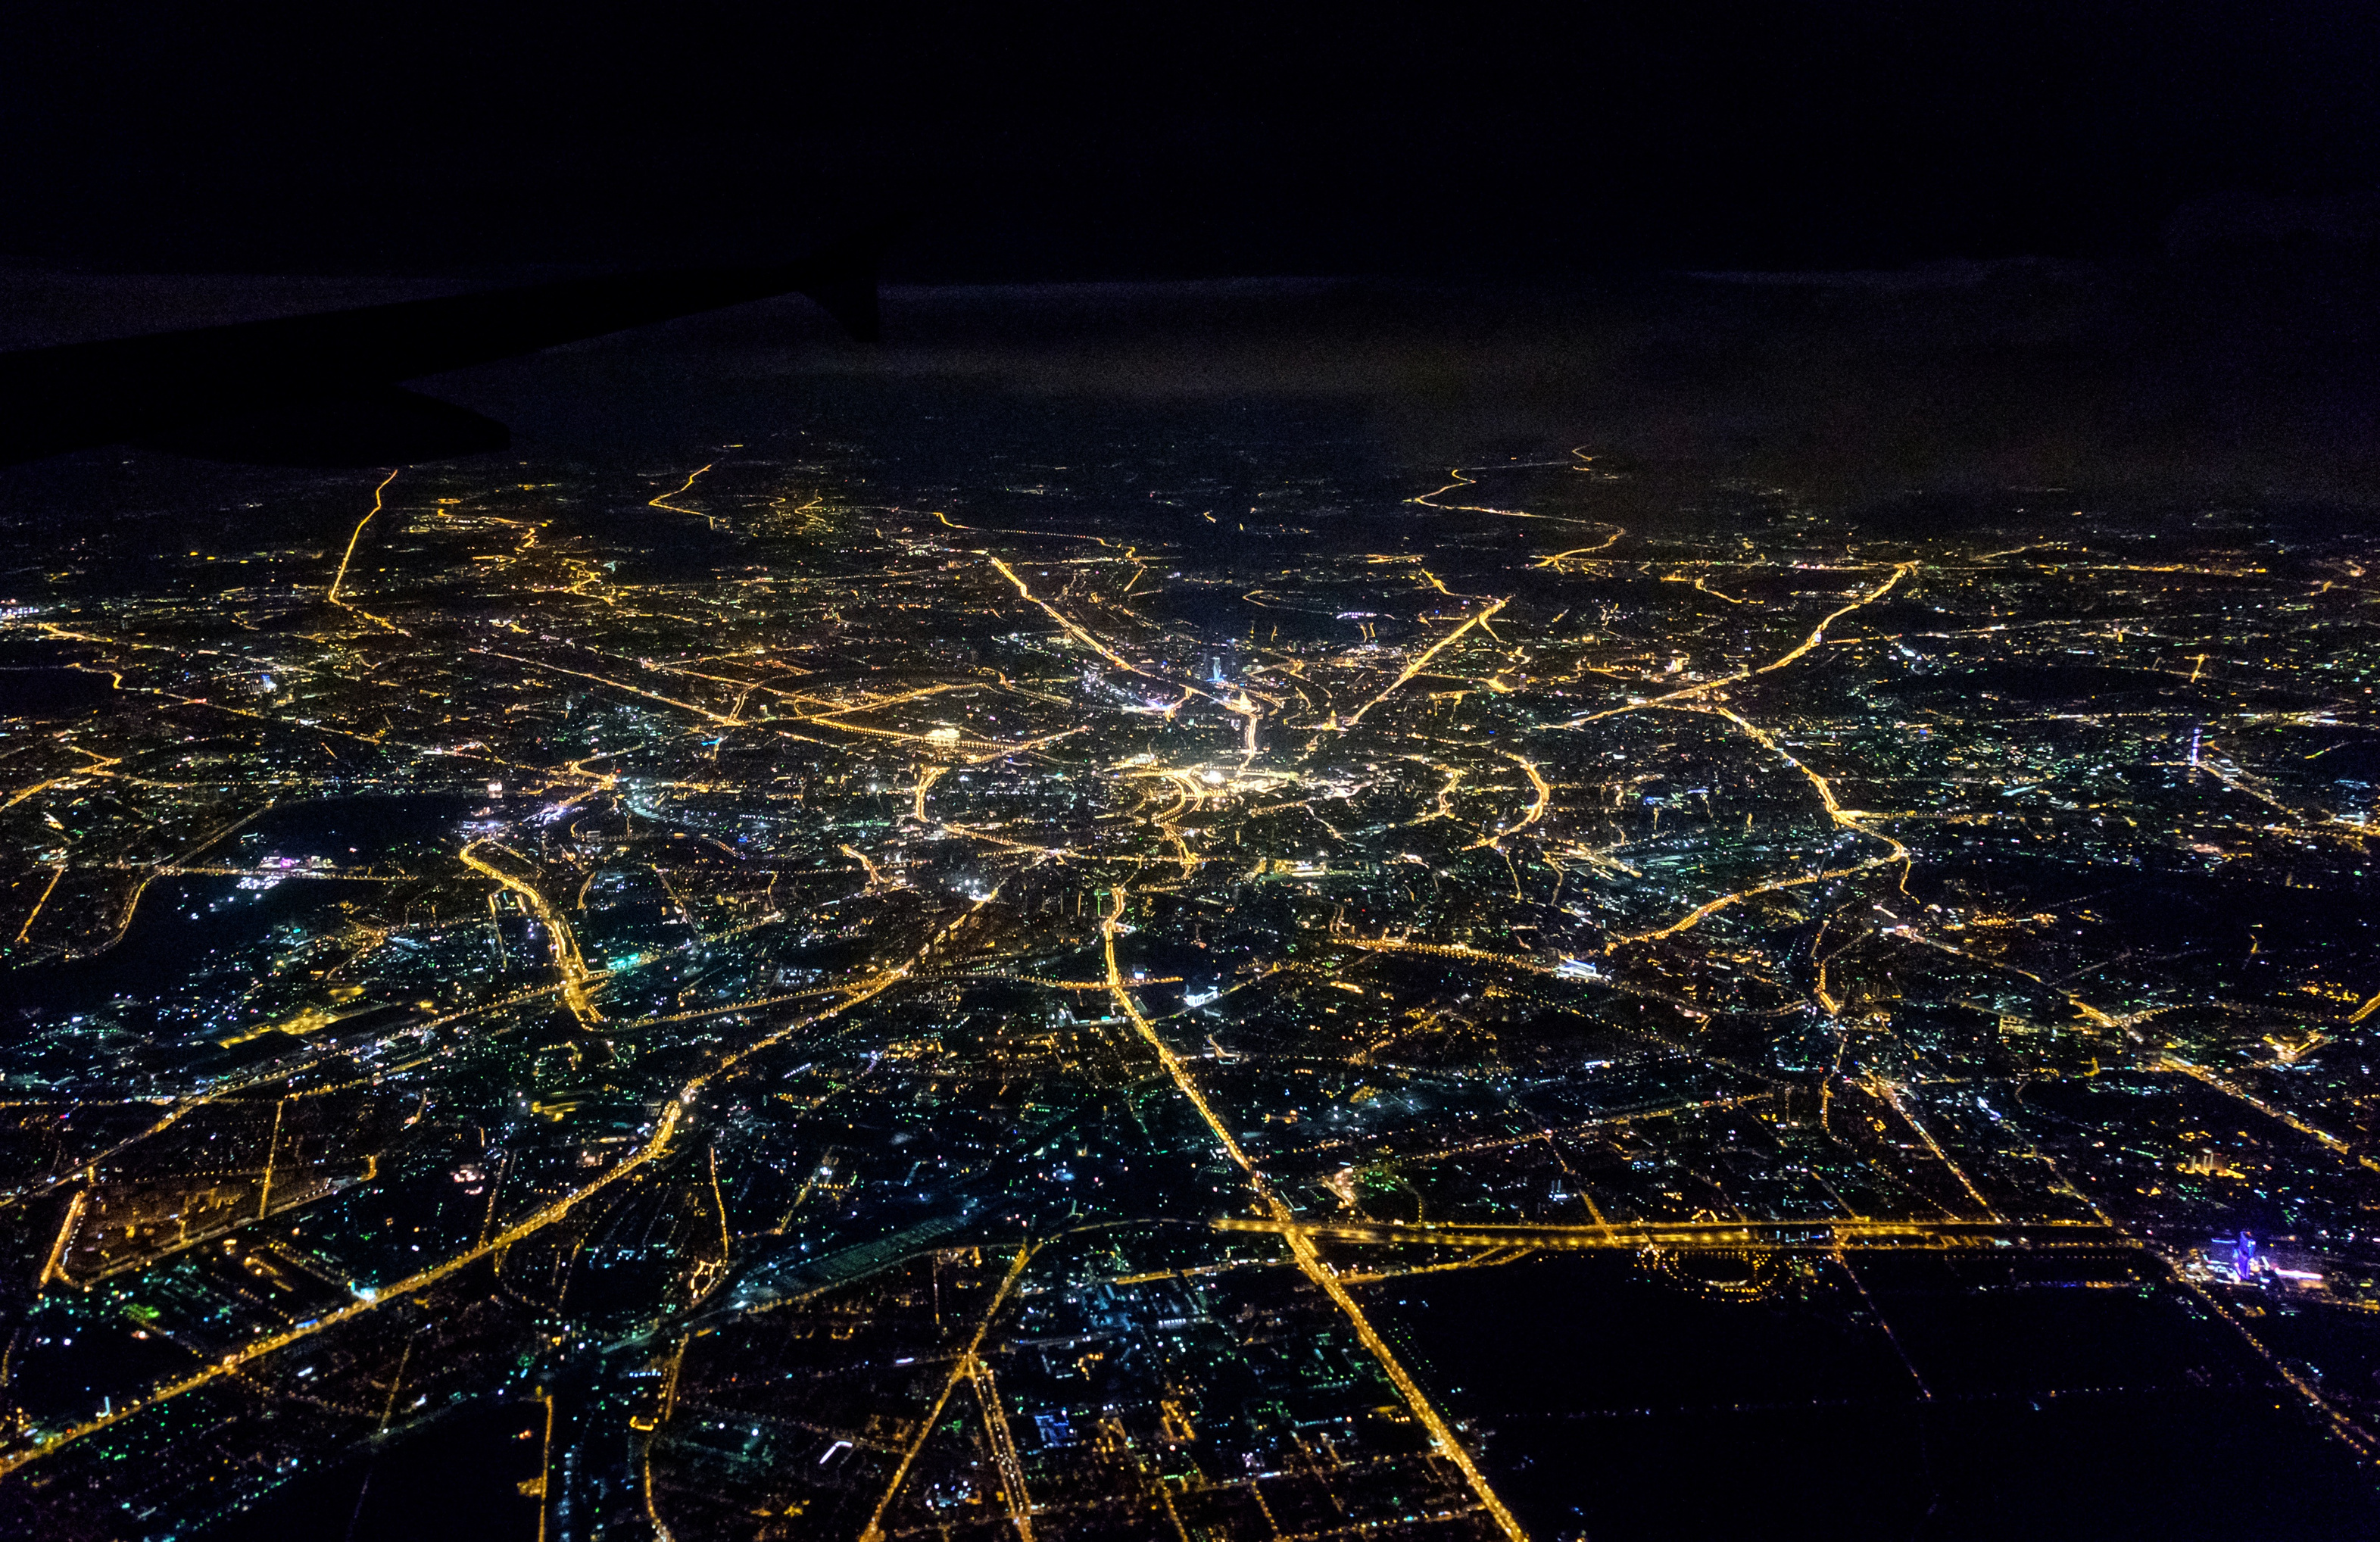 Aerial View of a City at Night